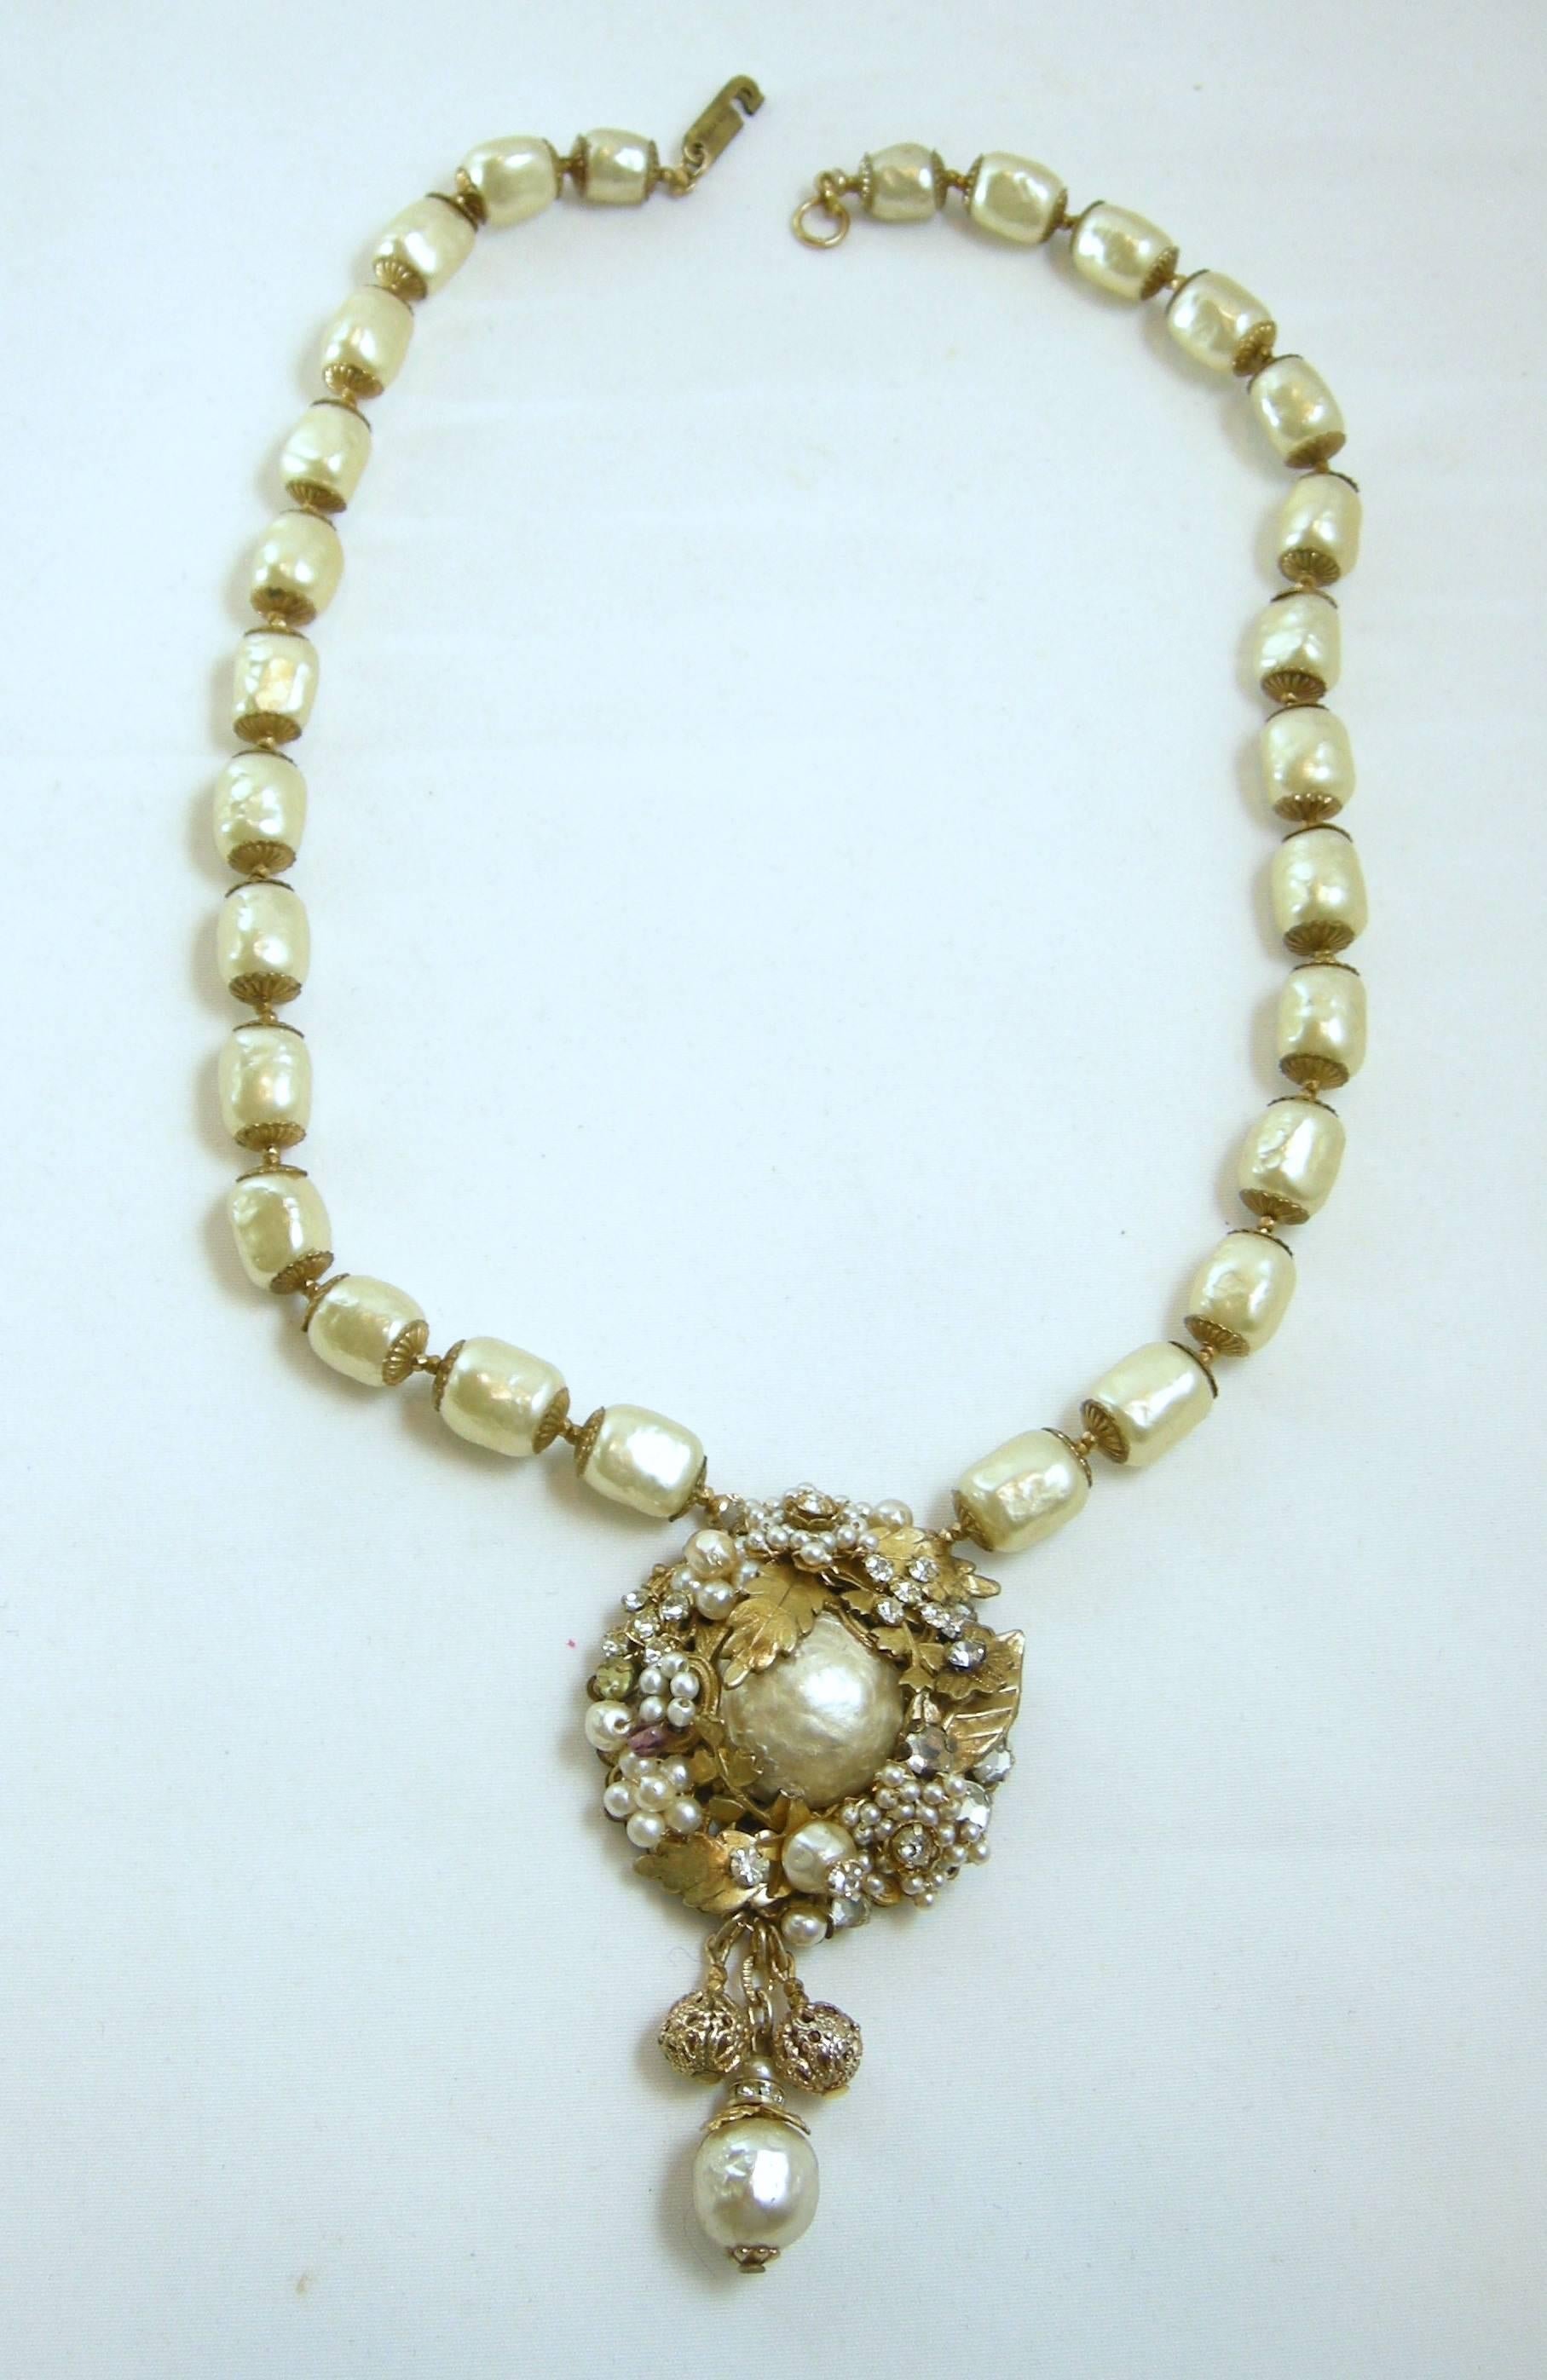 This Vintage Miriam Haskell necklace has graduated pearls that lead to a beautiful centerpiece with a large pearl. The large pearl has golden leaves with multi sized pearls and surrounding crystals. It has a large sized pearl dangling from the